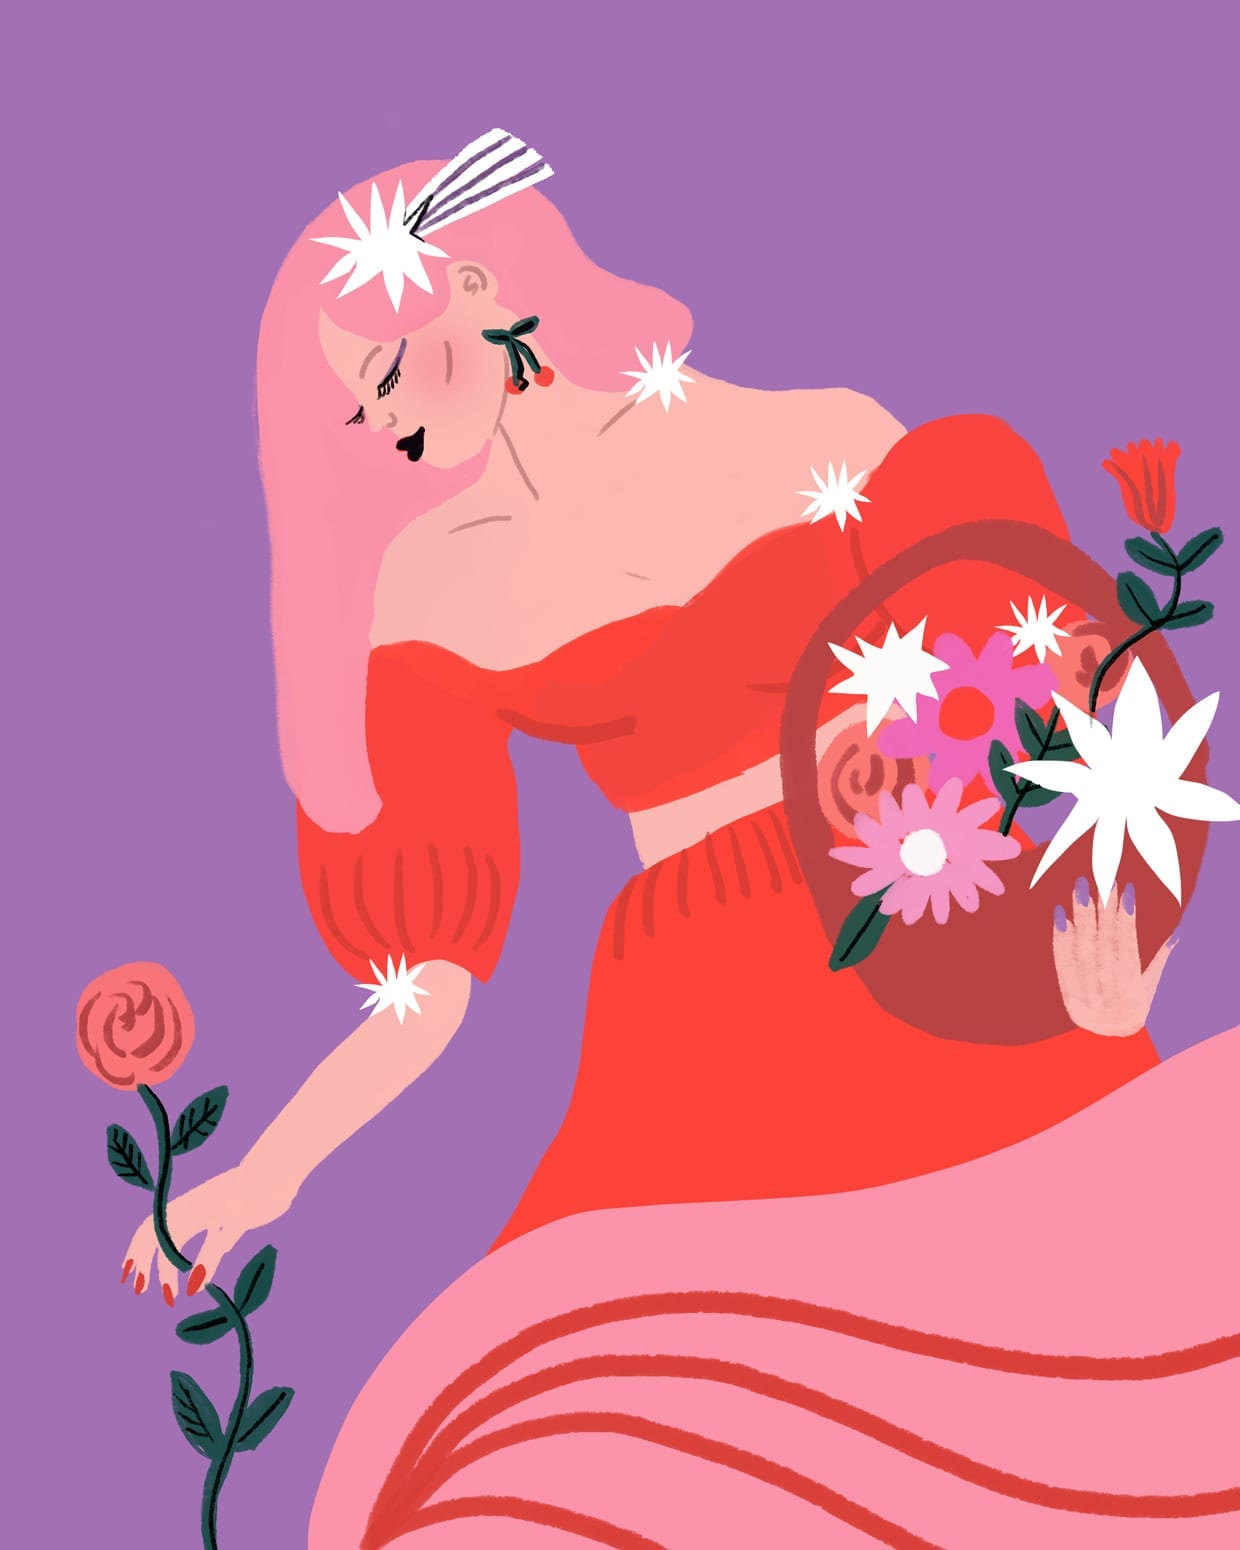 An illustration of a woman picking flowers.